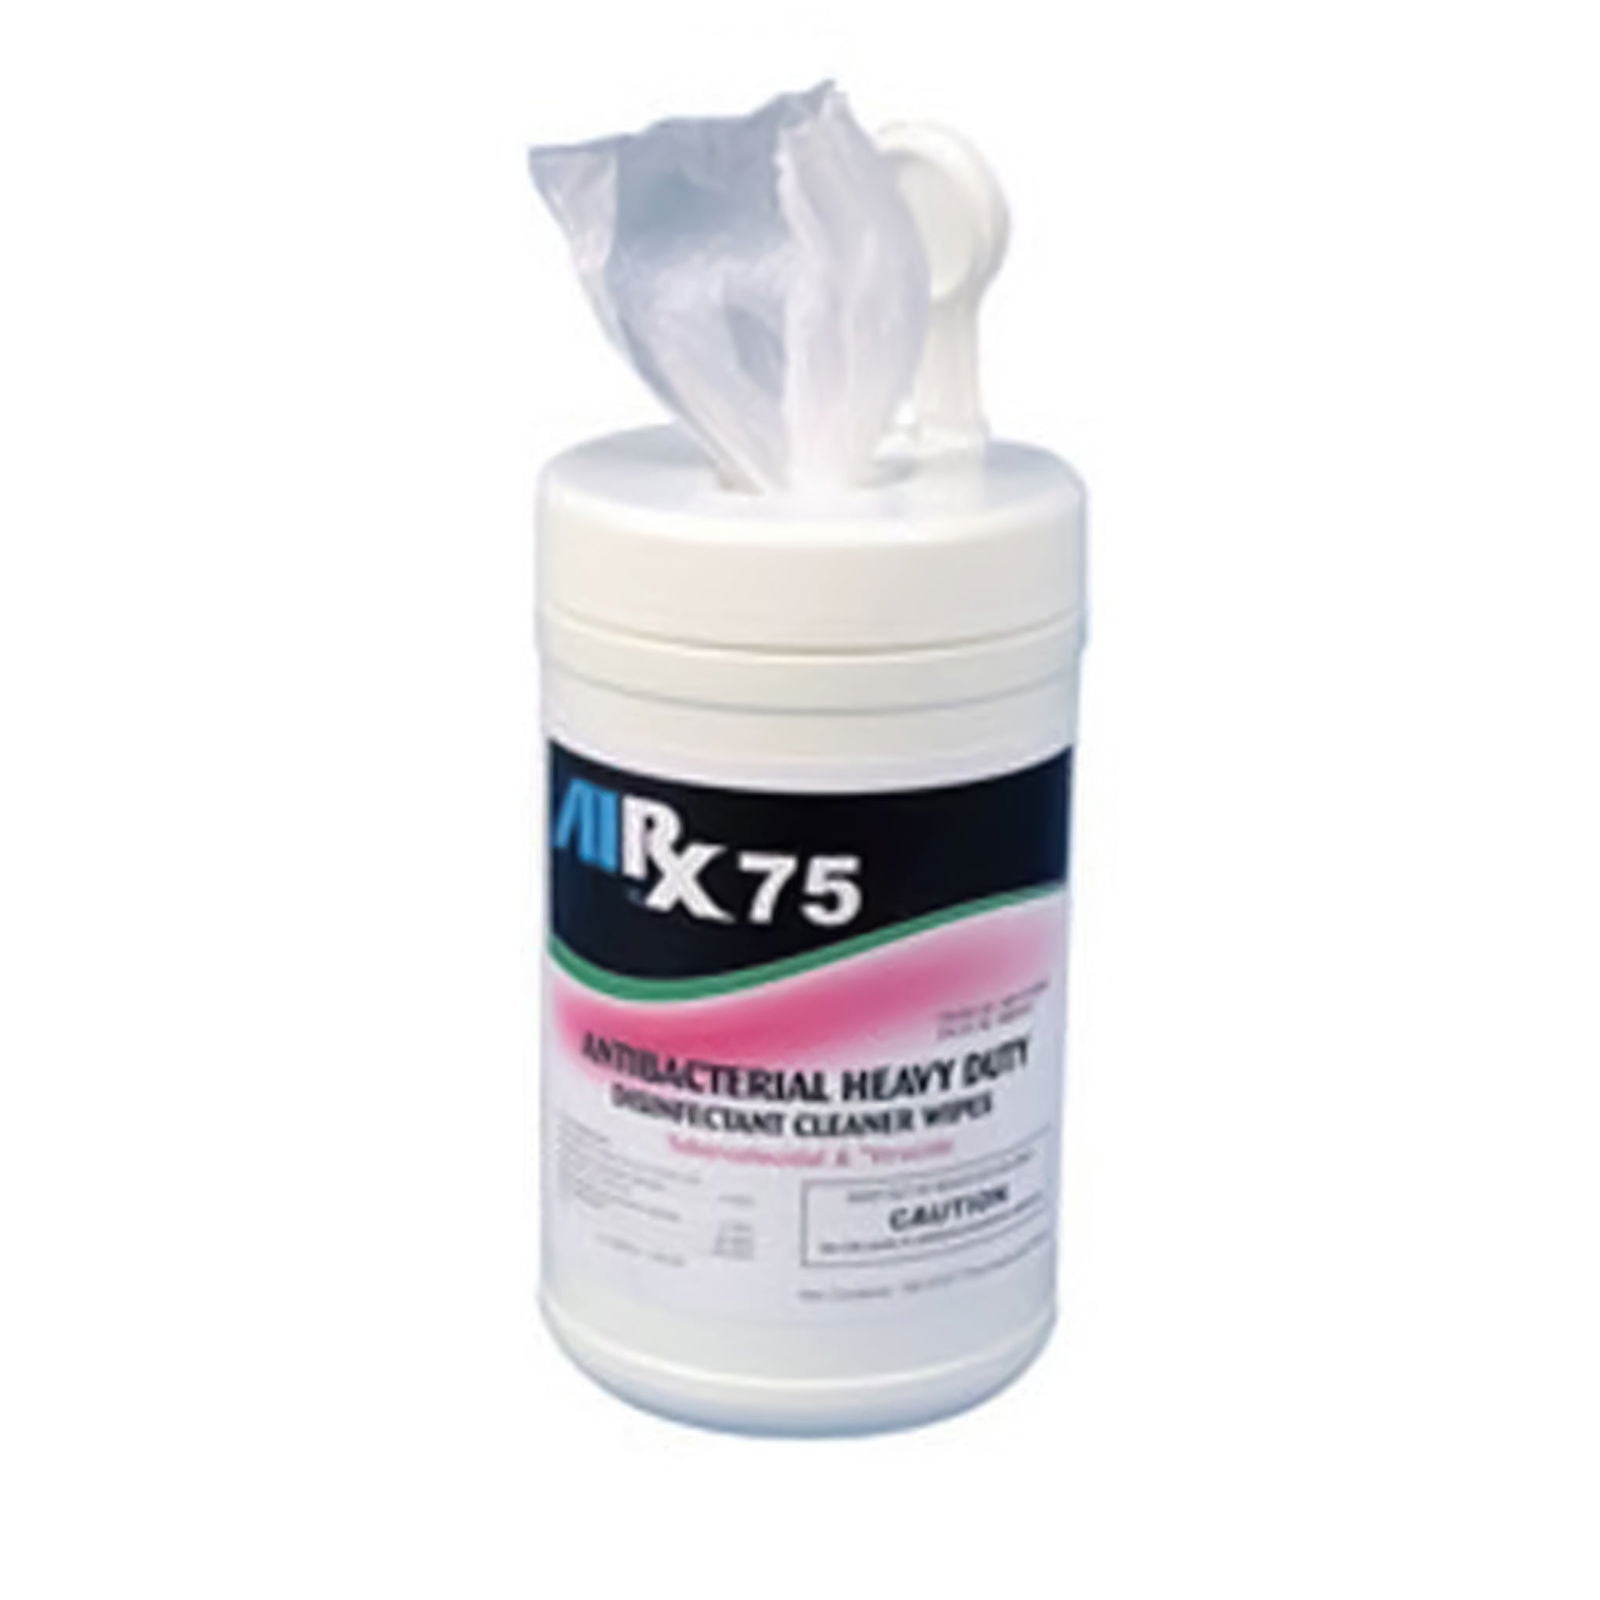 AIRX-75 Athletic Surface Disinfectant Wipes - Resilite Mats